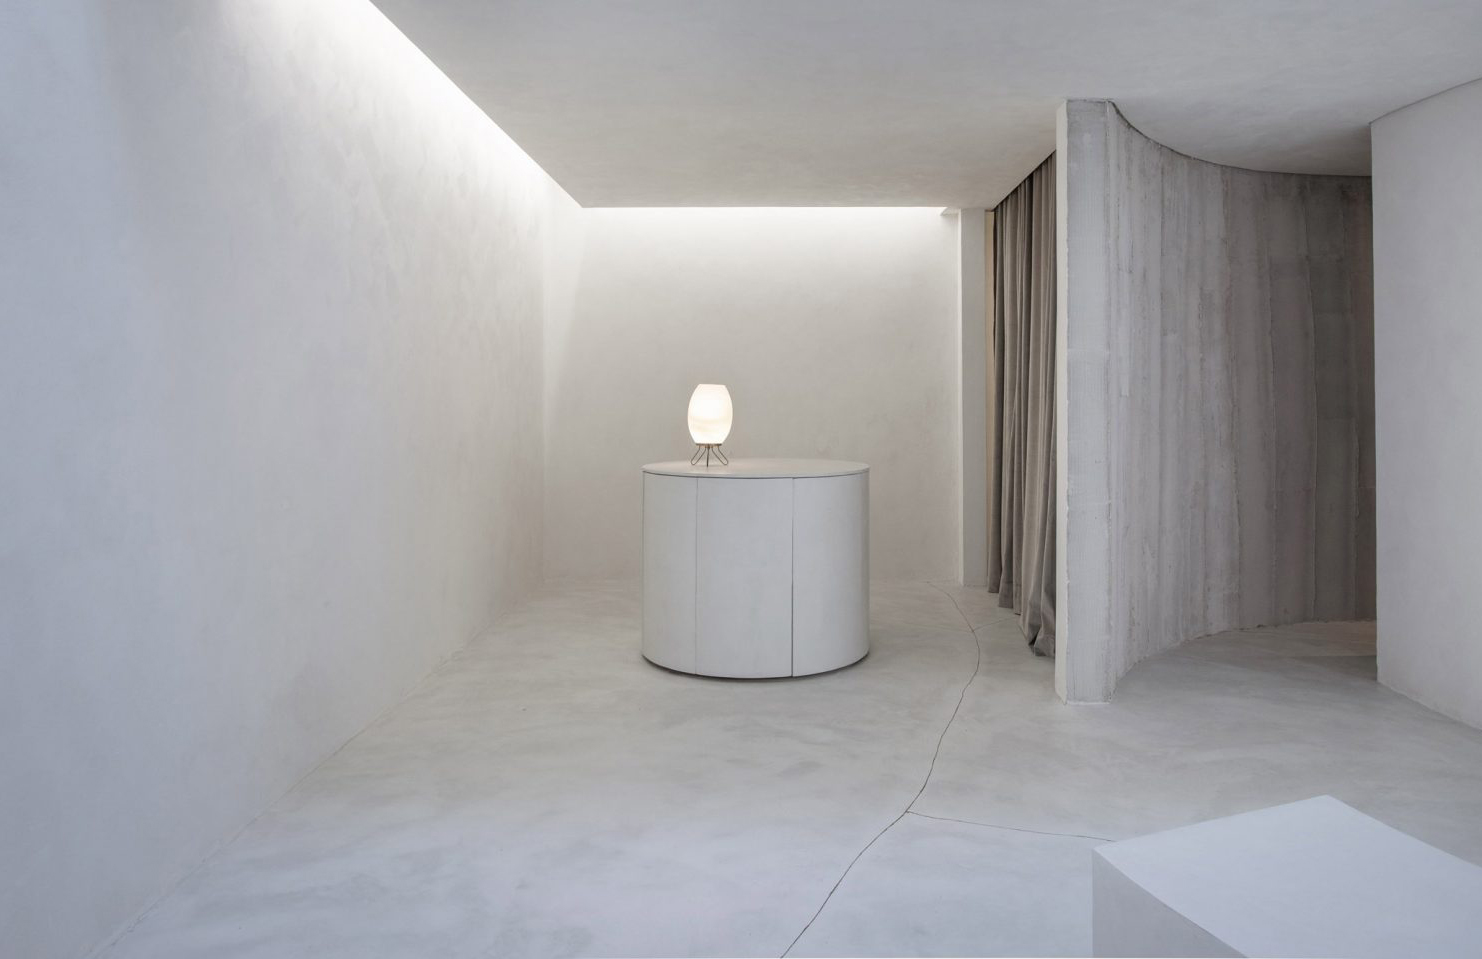 Selo Store in Sao Paulo takes minimalism to the max